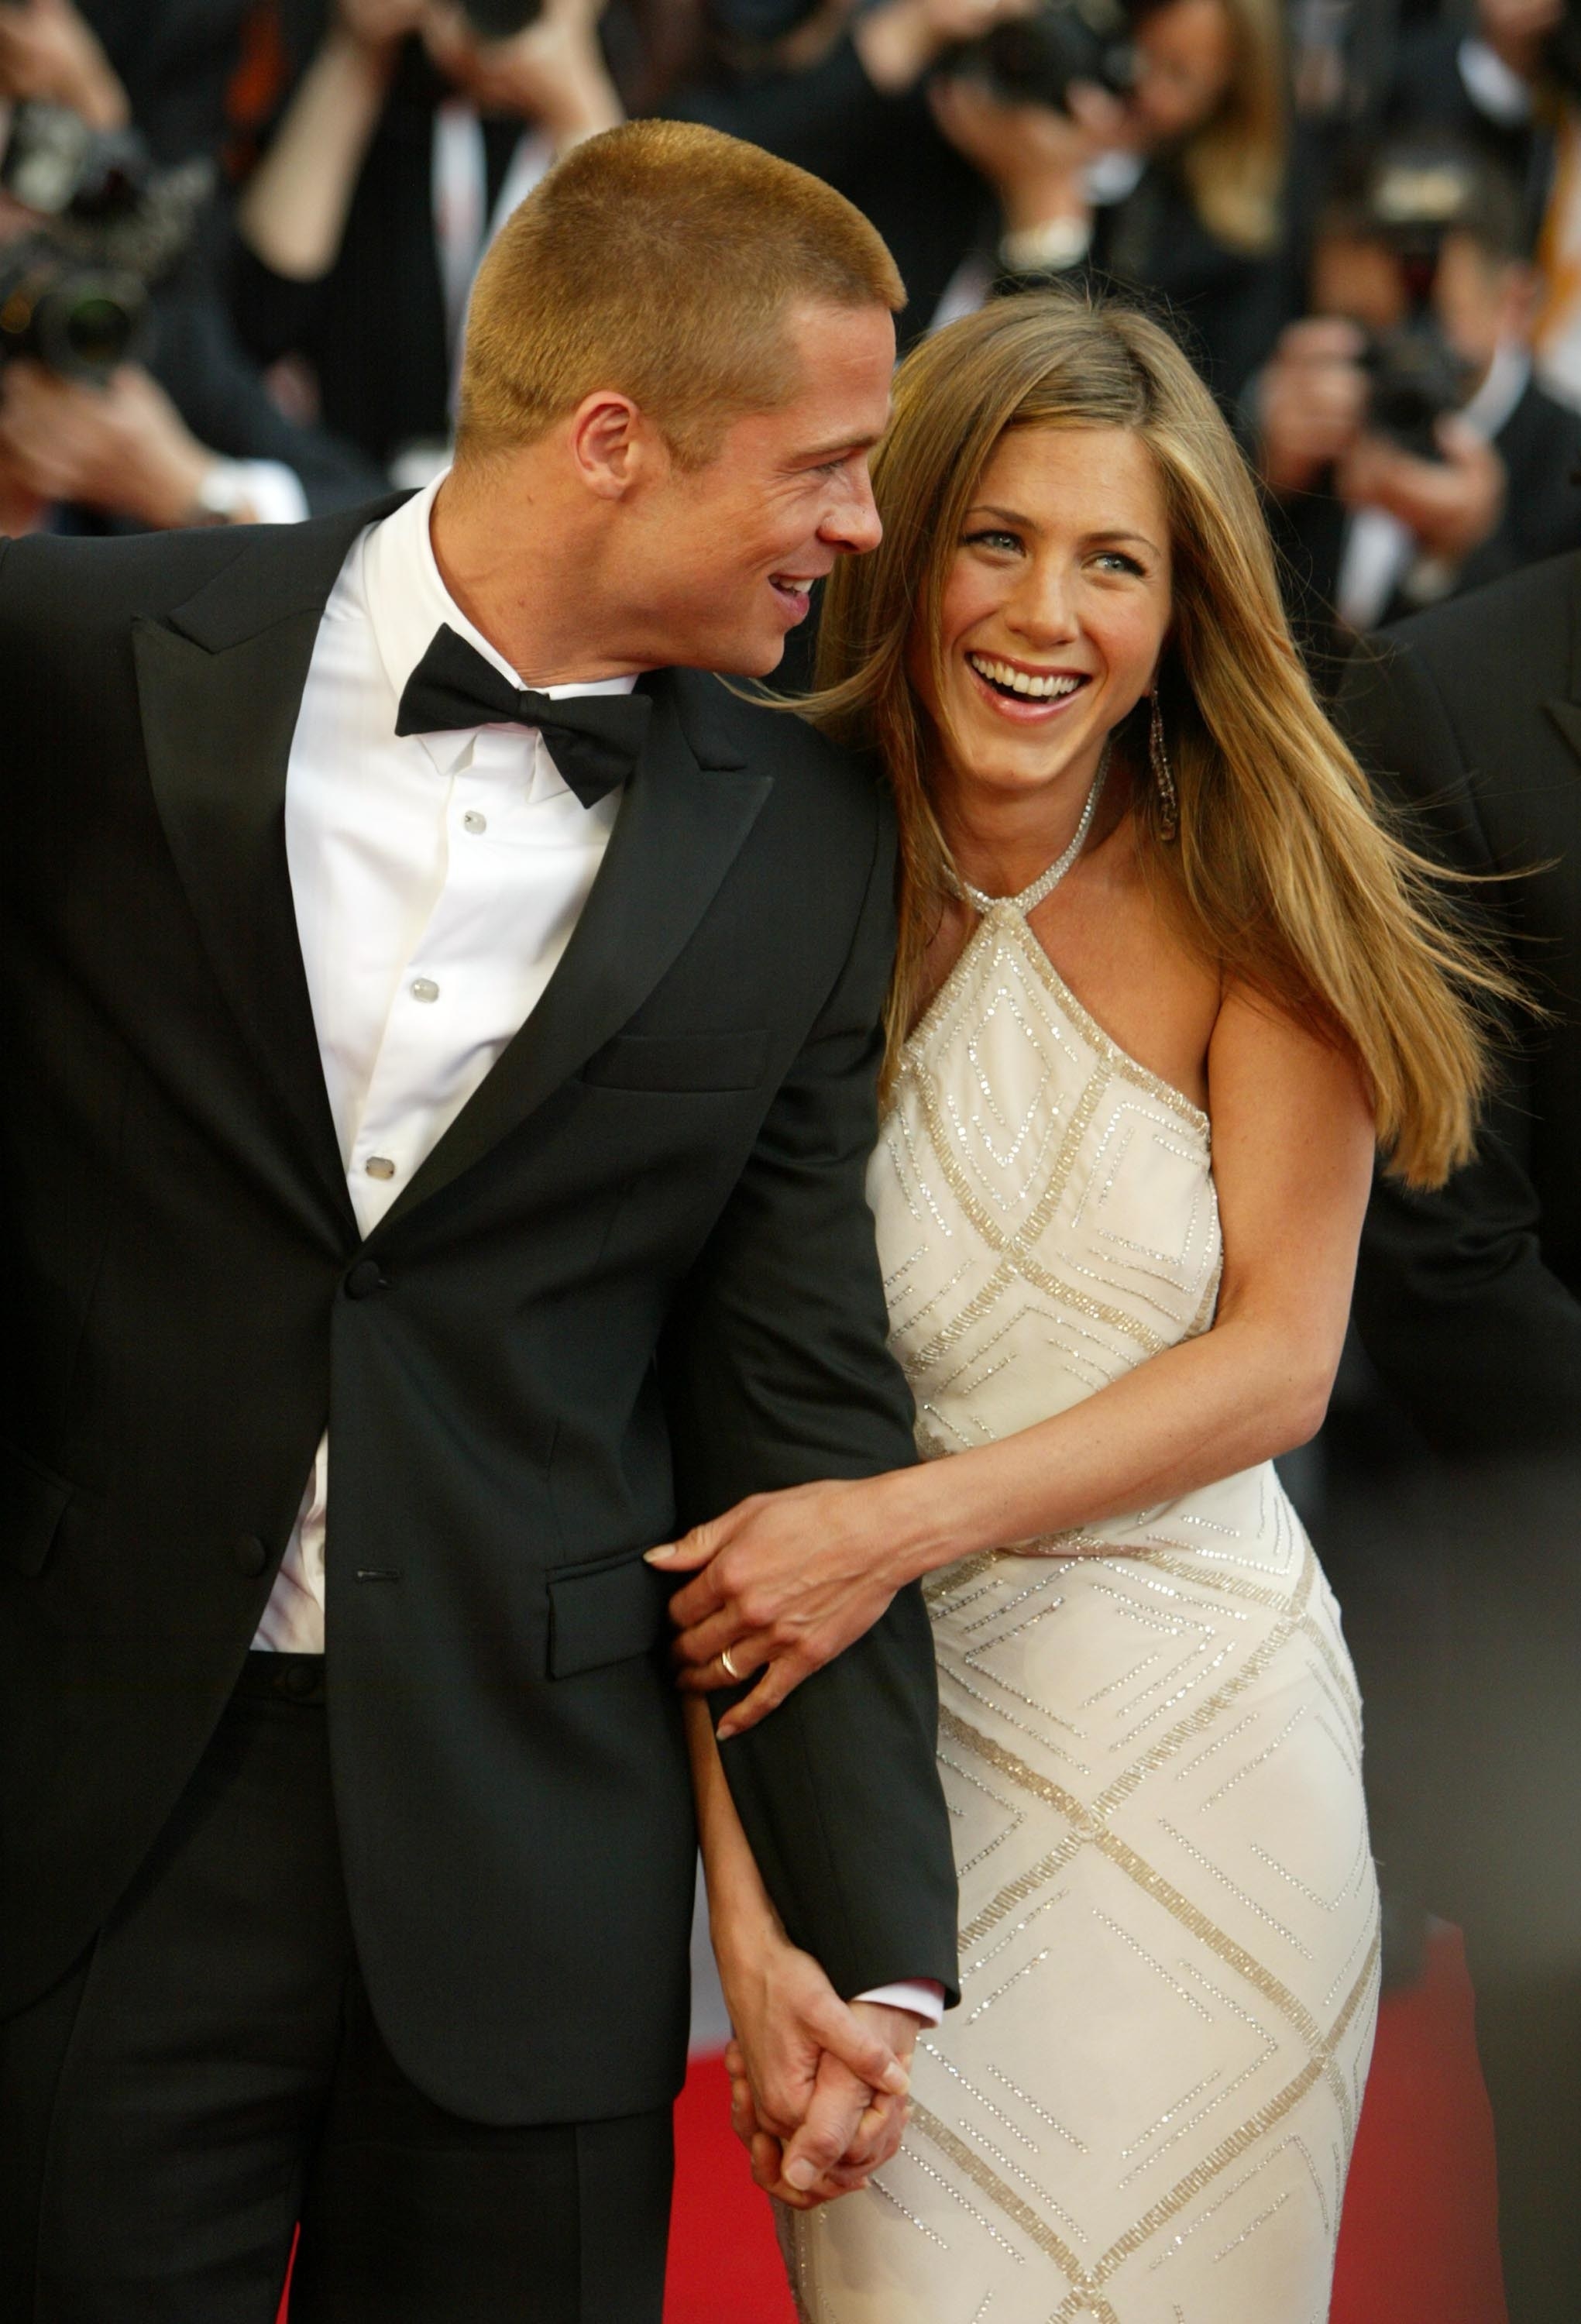 A smiling Brad Pitt and Jennifer Aniston on a red carpet